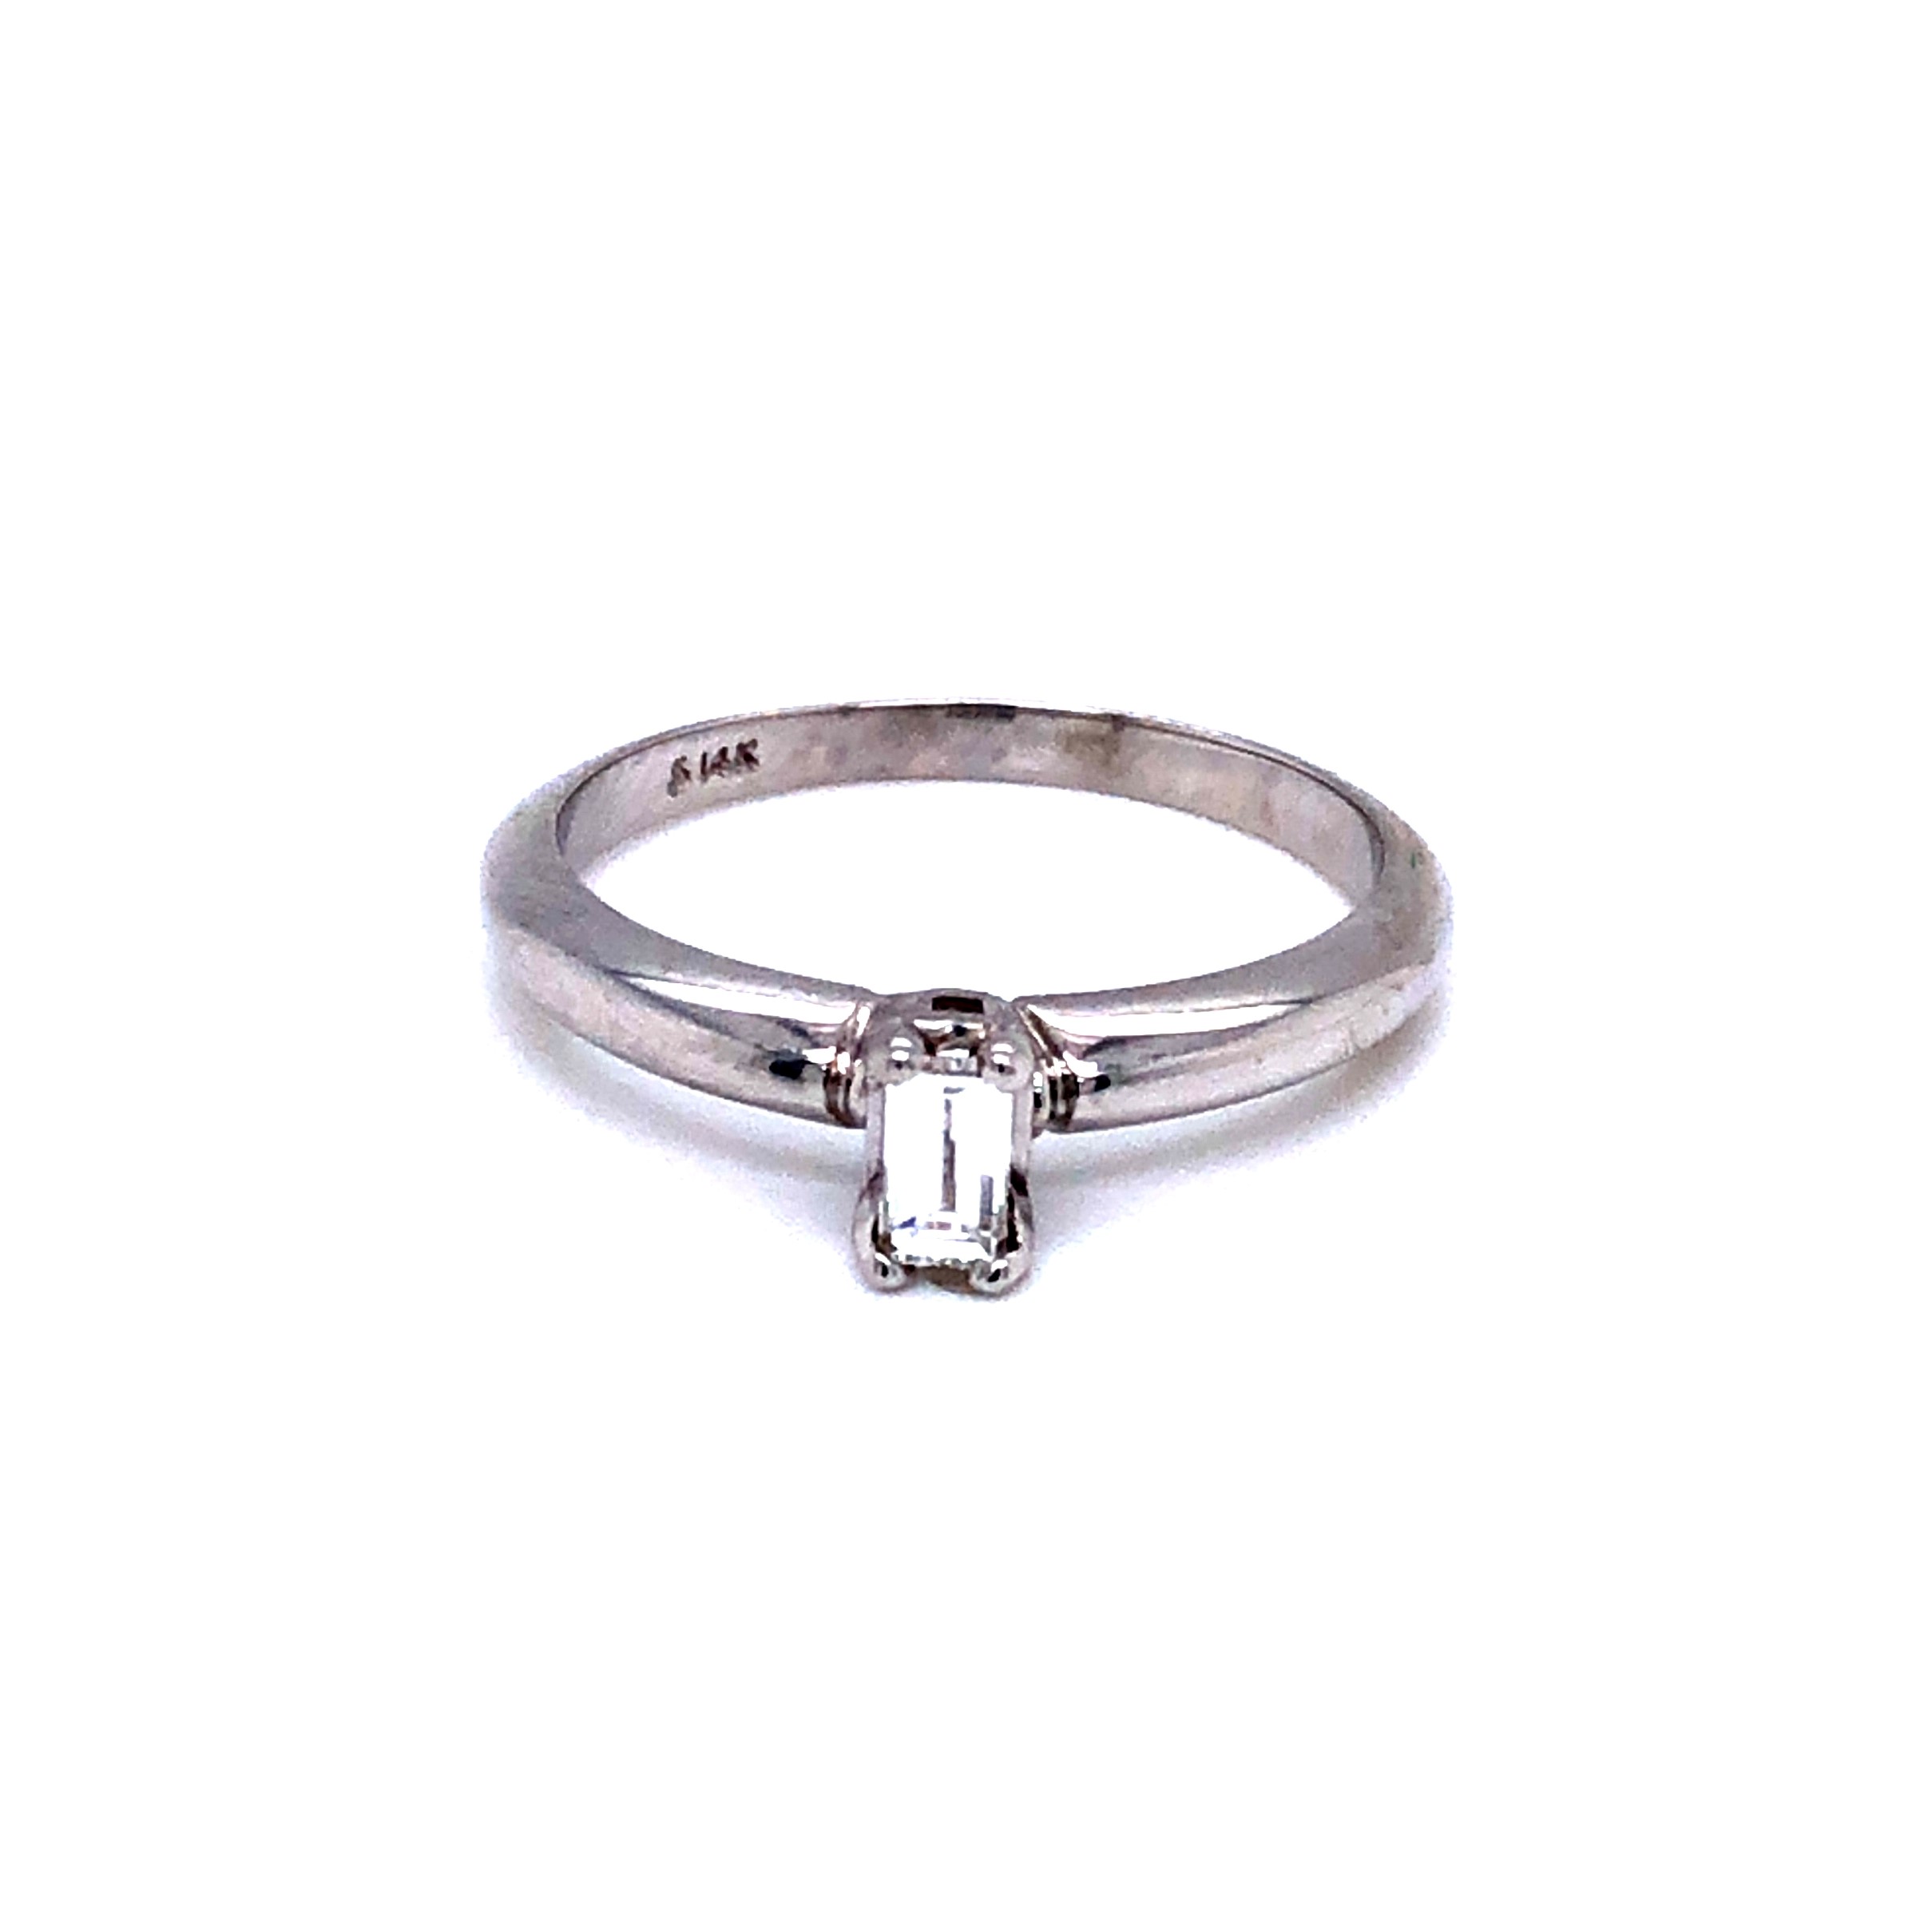 Lady s 14 karat white gold solitaire engagement ring with an Emerald cut diamond weighing 0.18 carat  F color  VS1 clarity.